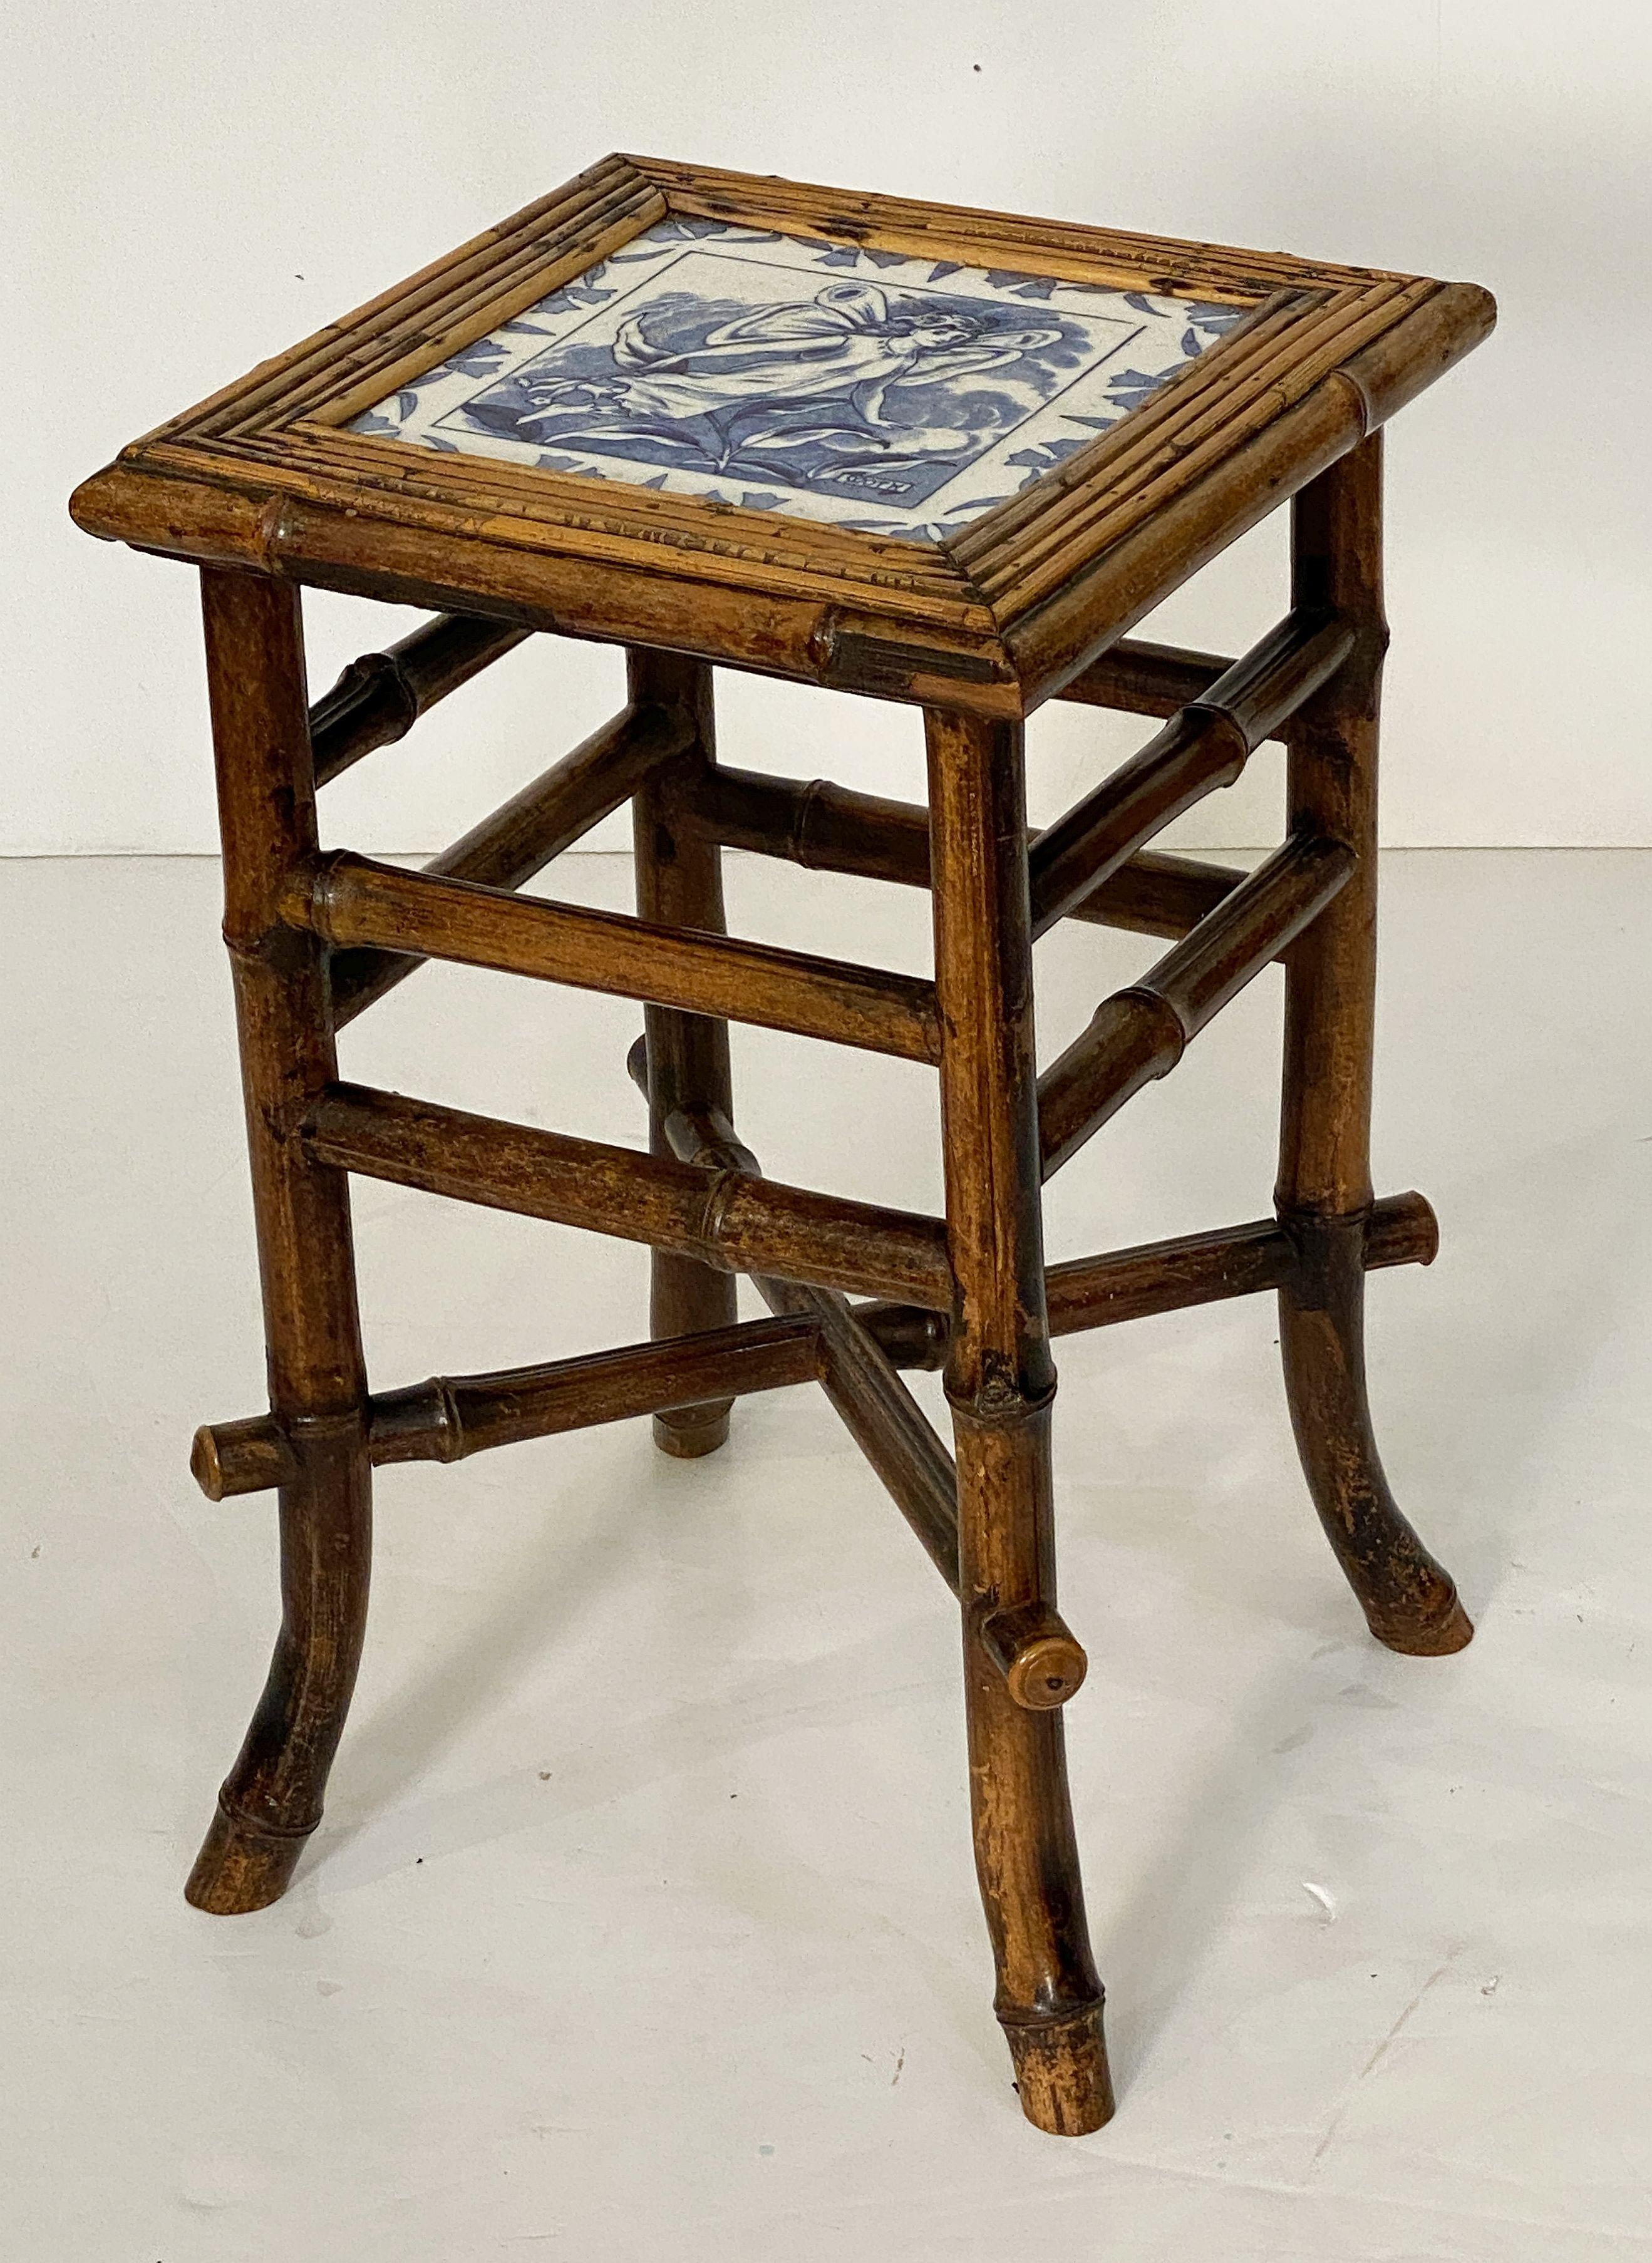 English Bamboo Table or Stool with Tile Seat from the Aesthetic Movement Era In Good Condition For Sale In Austin, TX